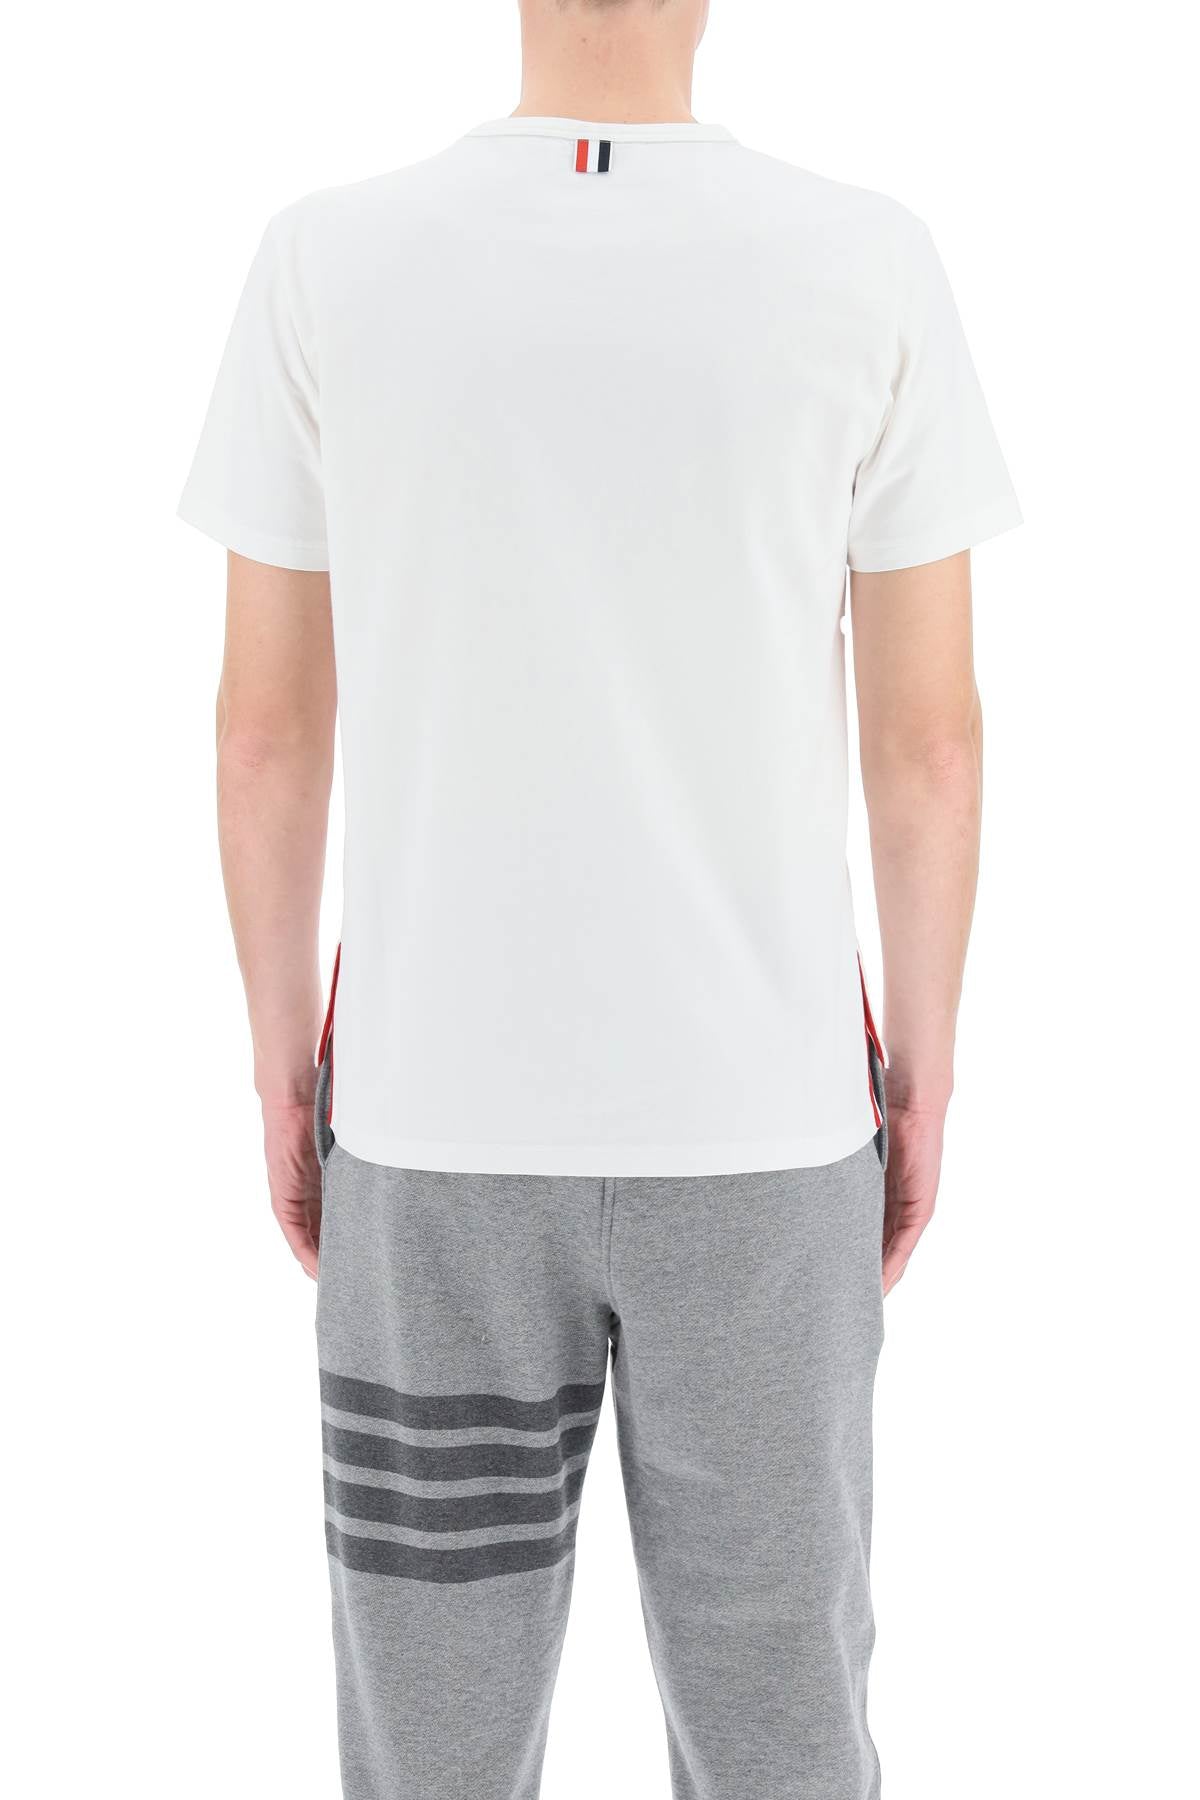 Thom browne t-shirt with tricolor pocket-2